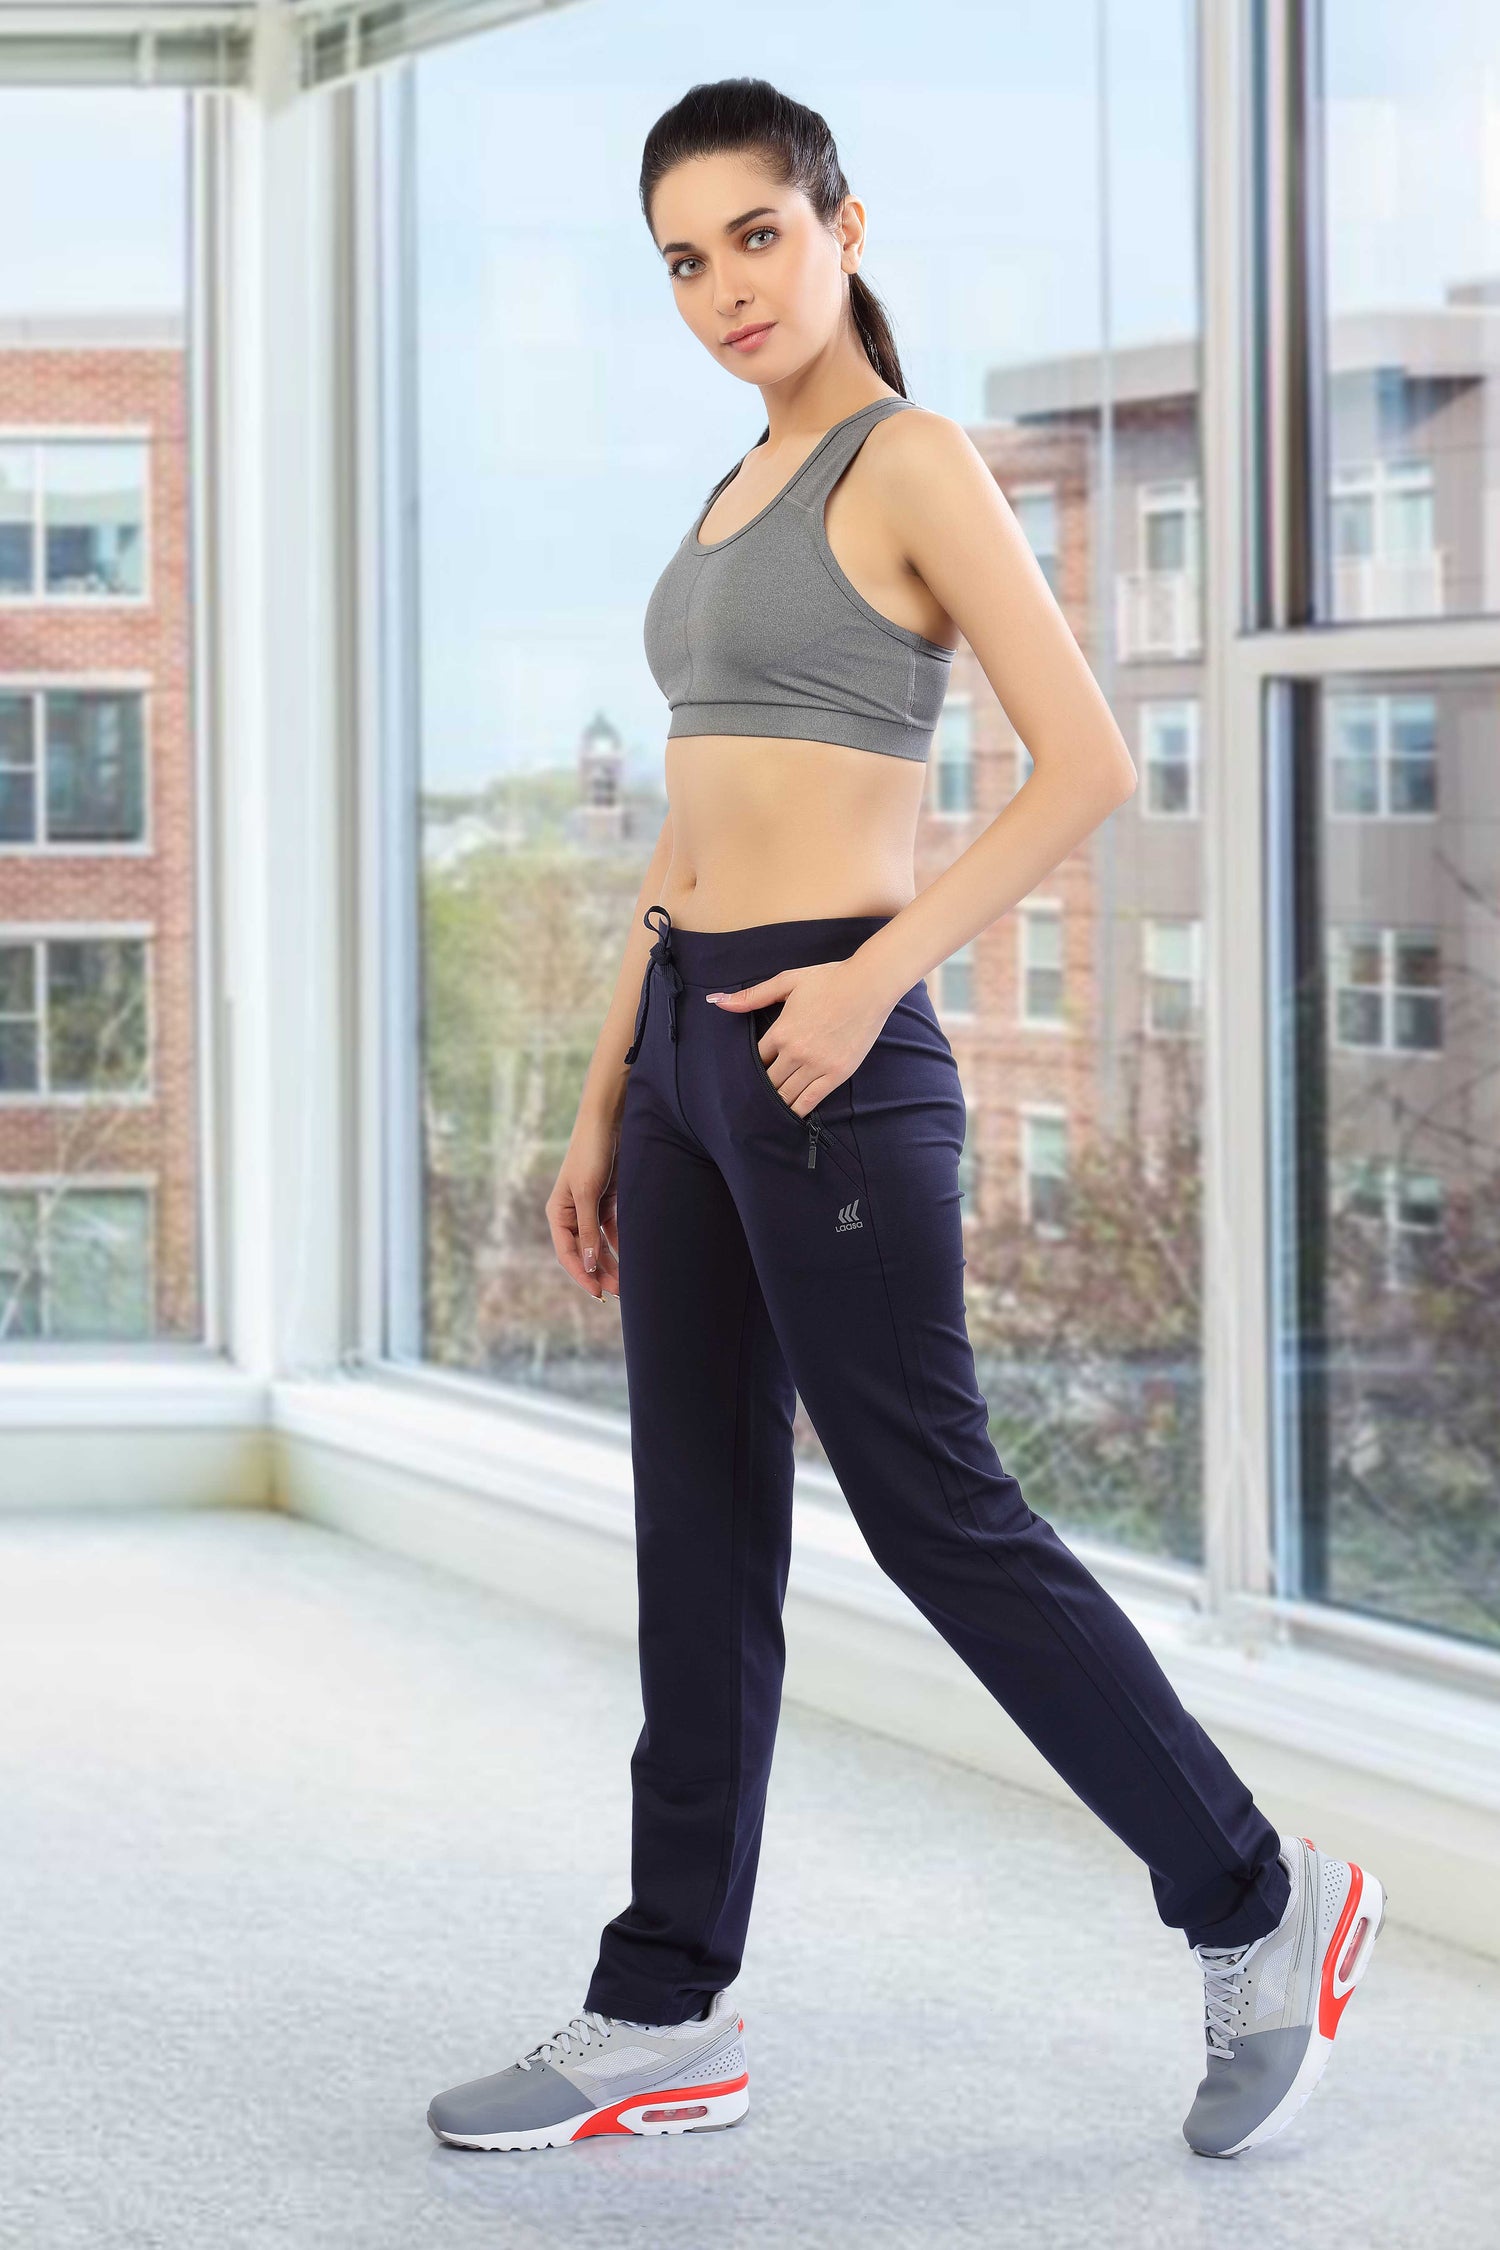 Women's Activewear Outfits - Online Store